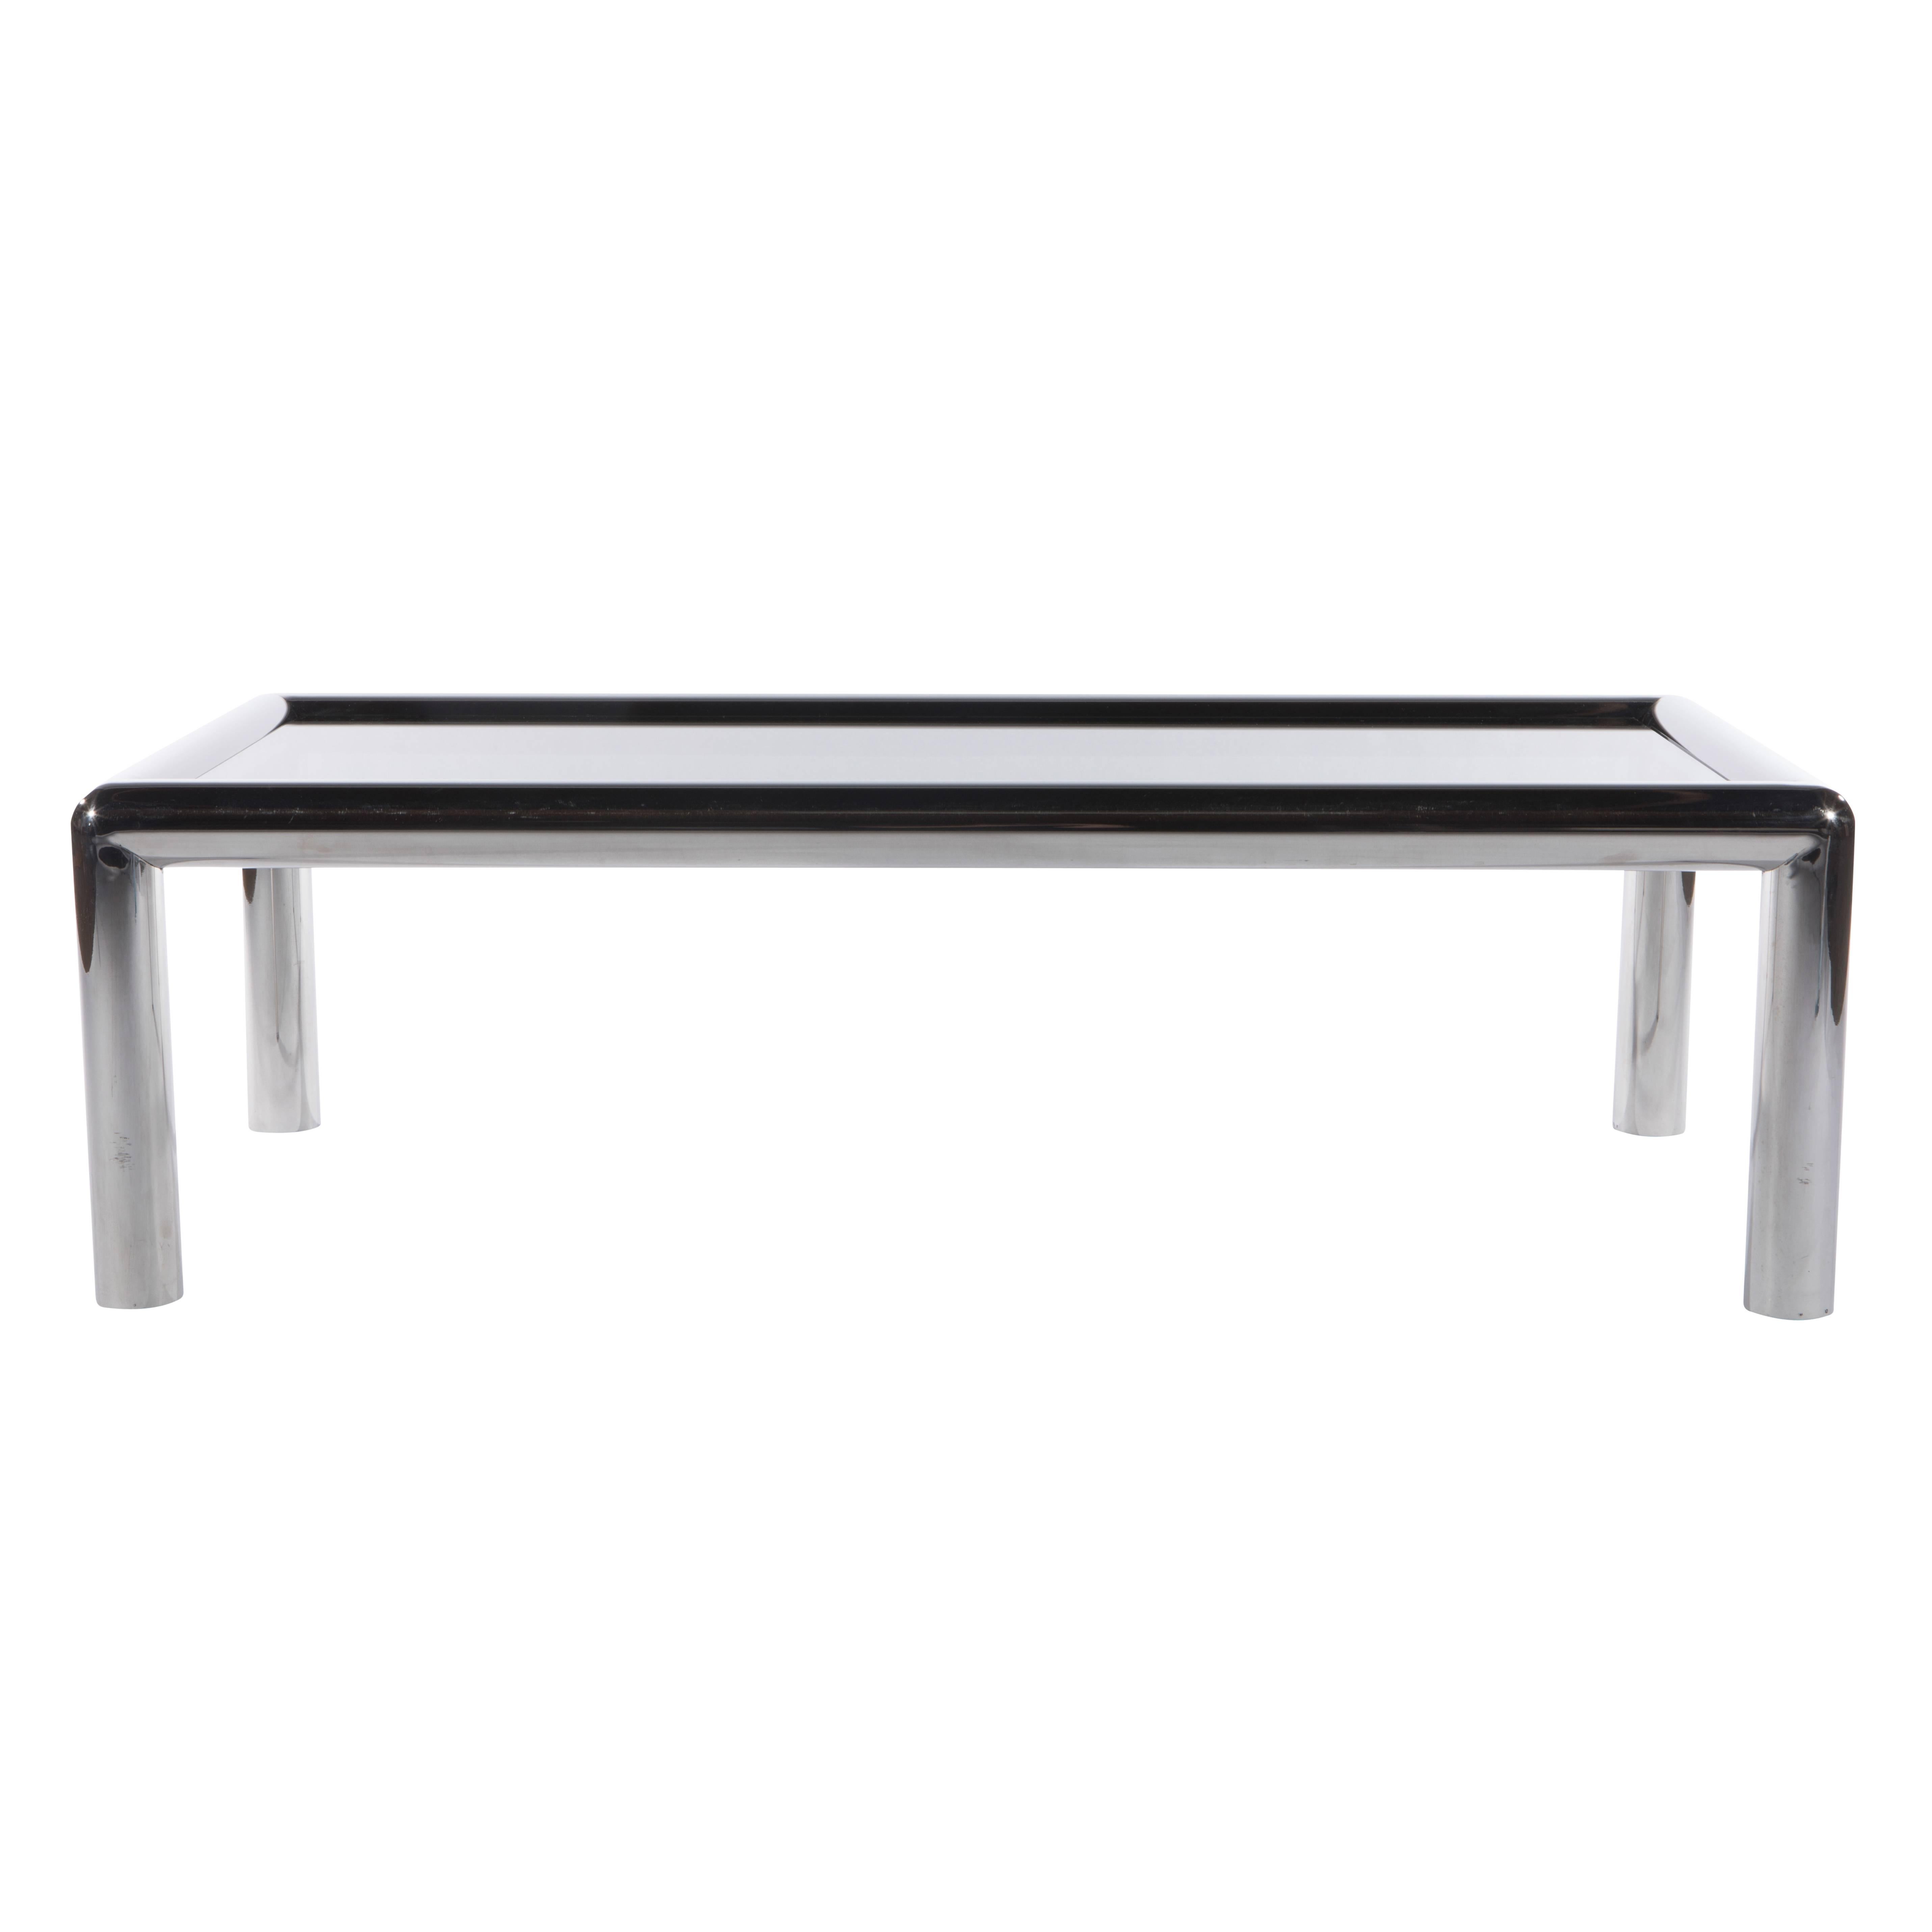 Rectangular-shaped, tubular-aluminium and smoked-glass coffee table from the 